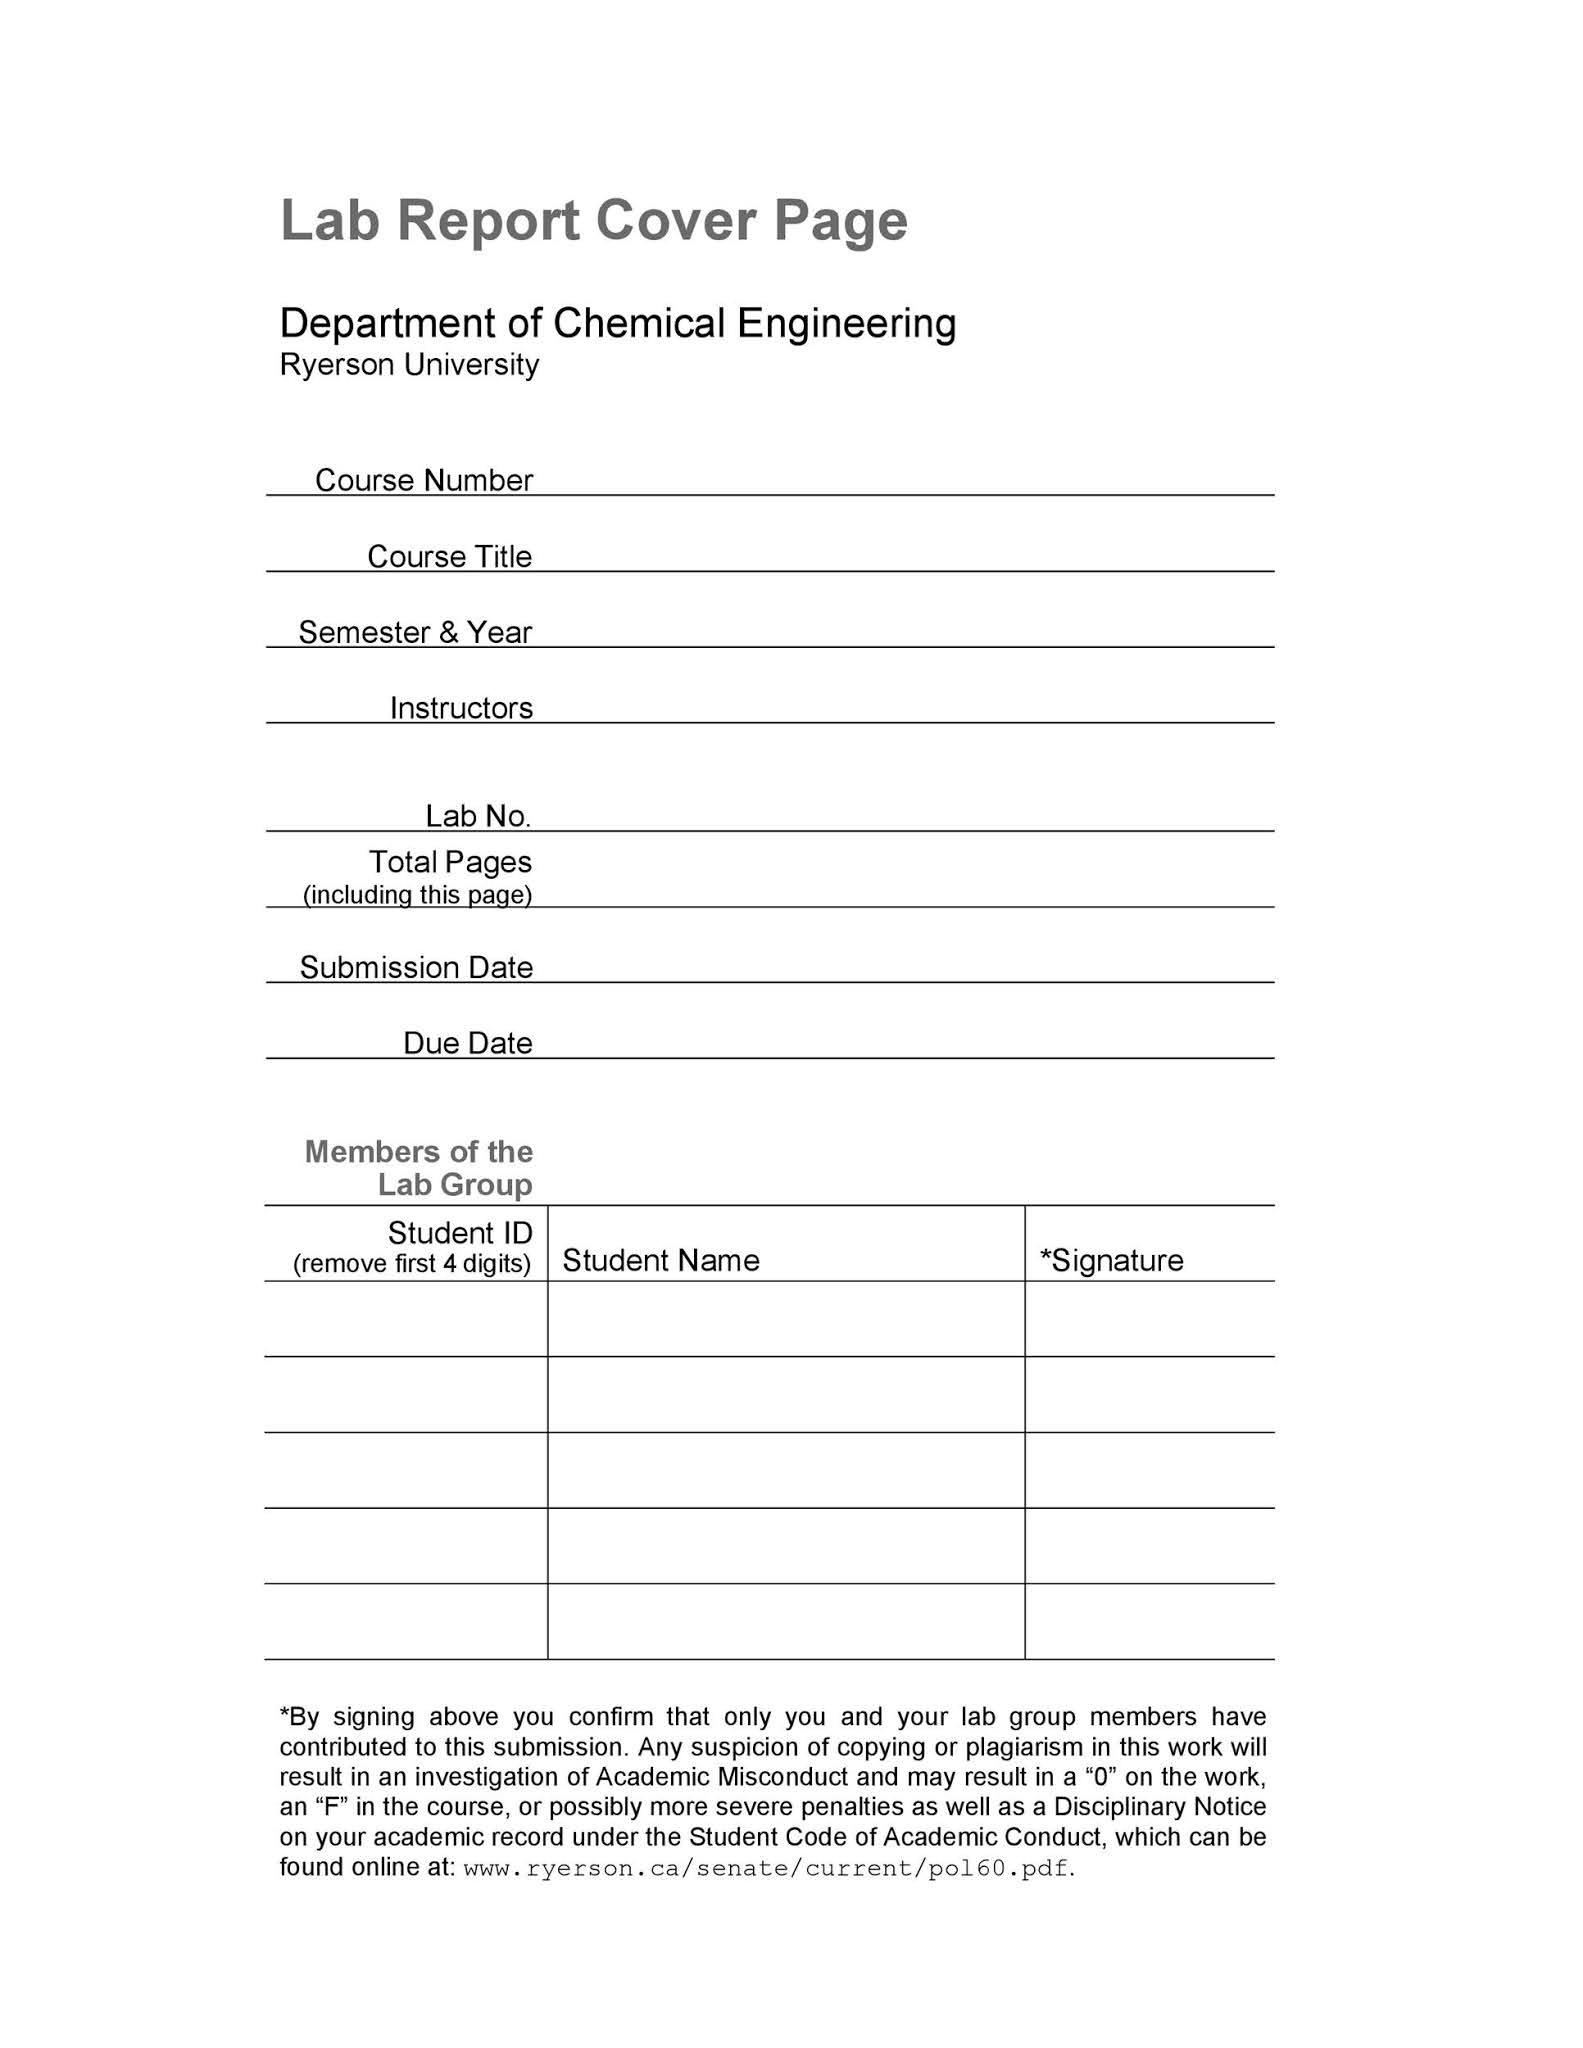 examples-of-cover-sheets-medical-resume